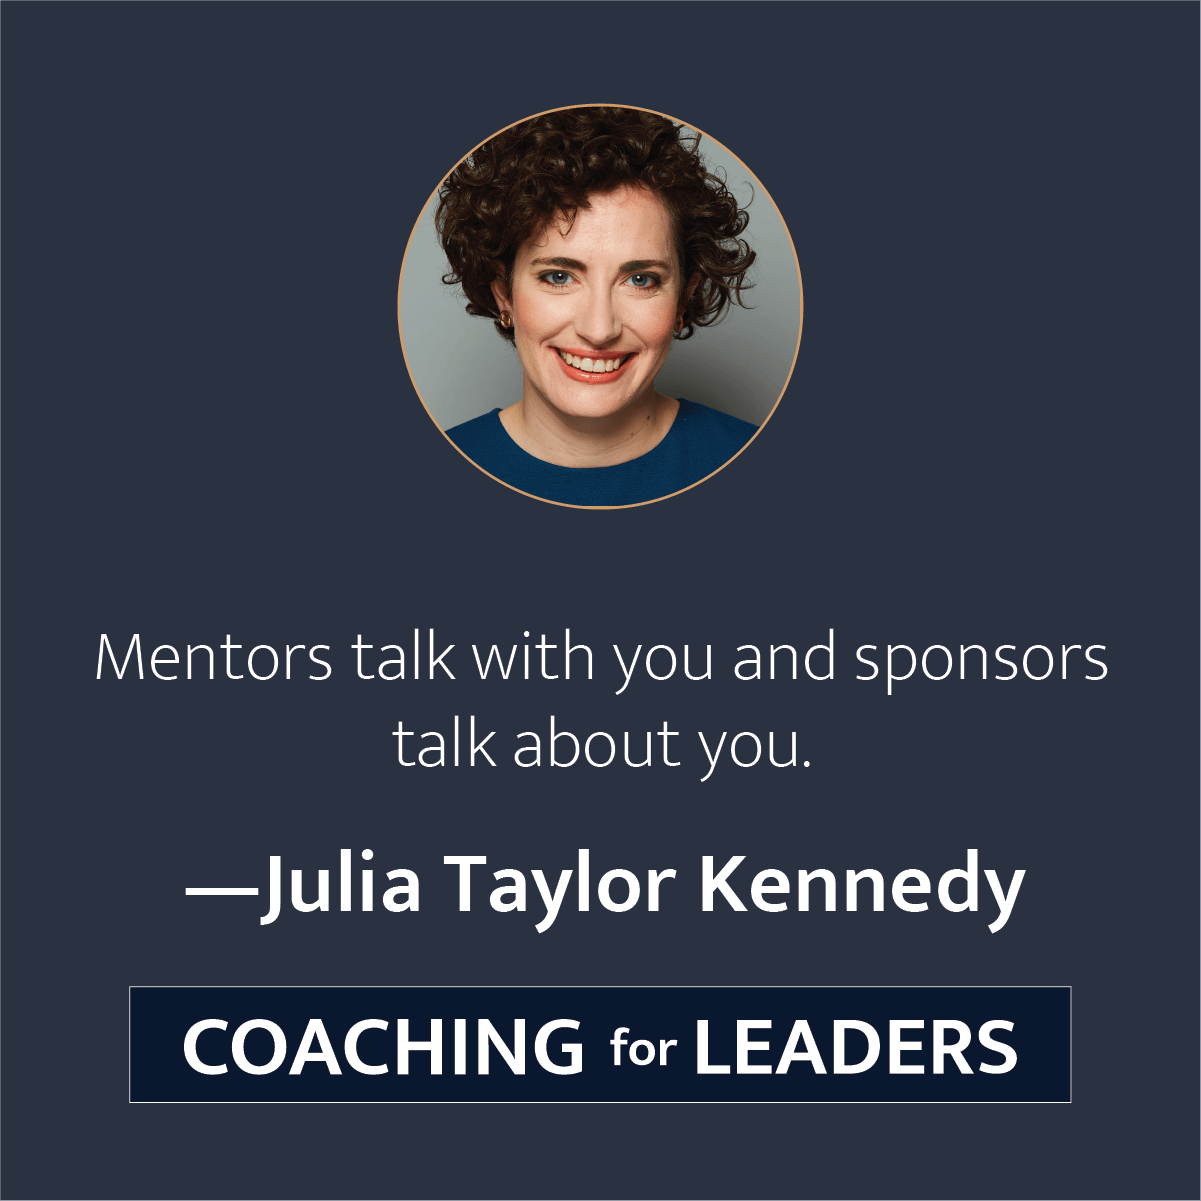 Mentors talk with you and sponsors talk about you.